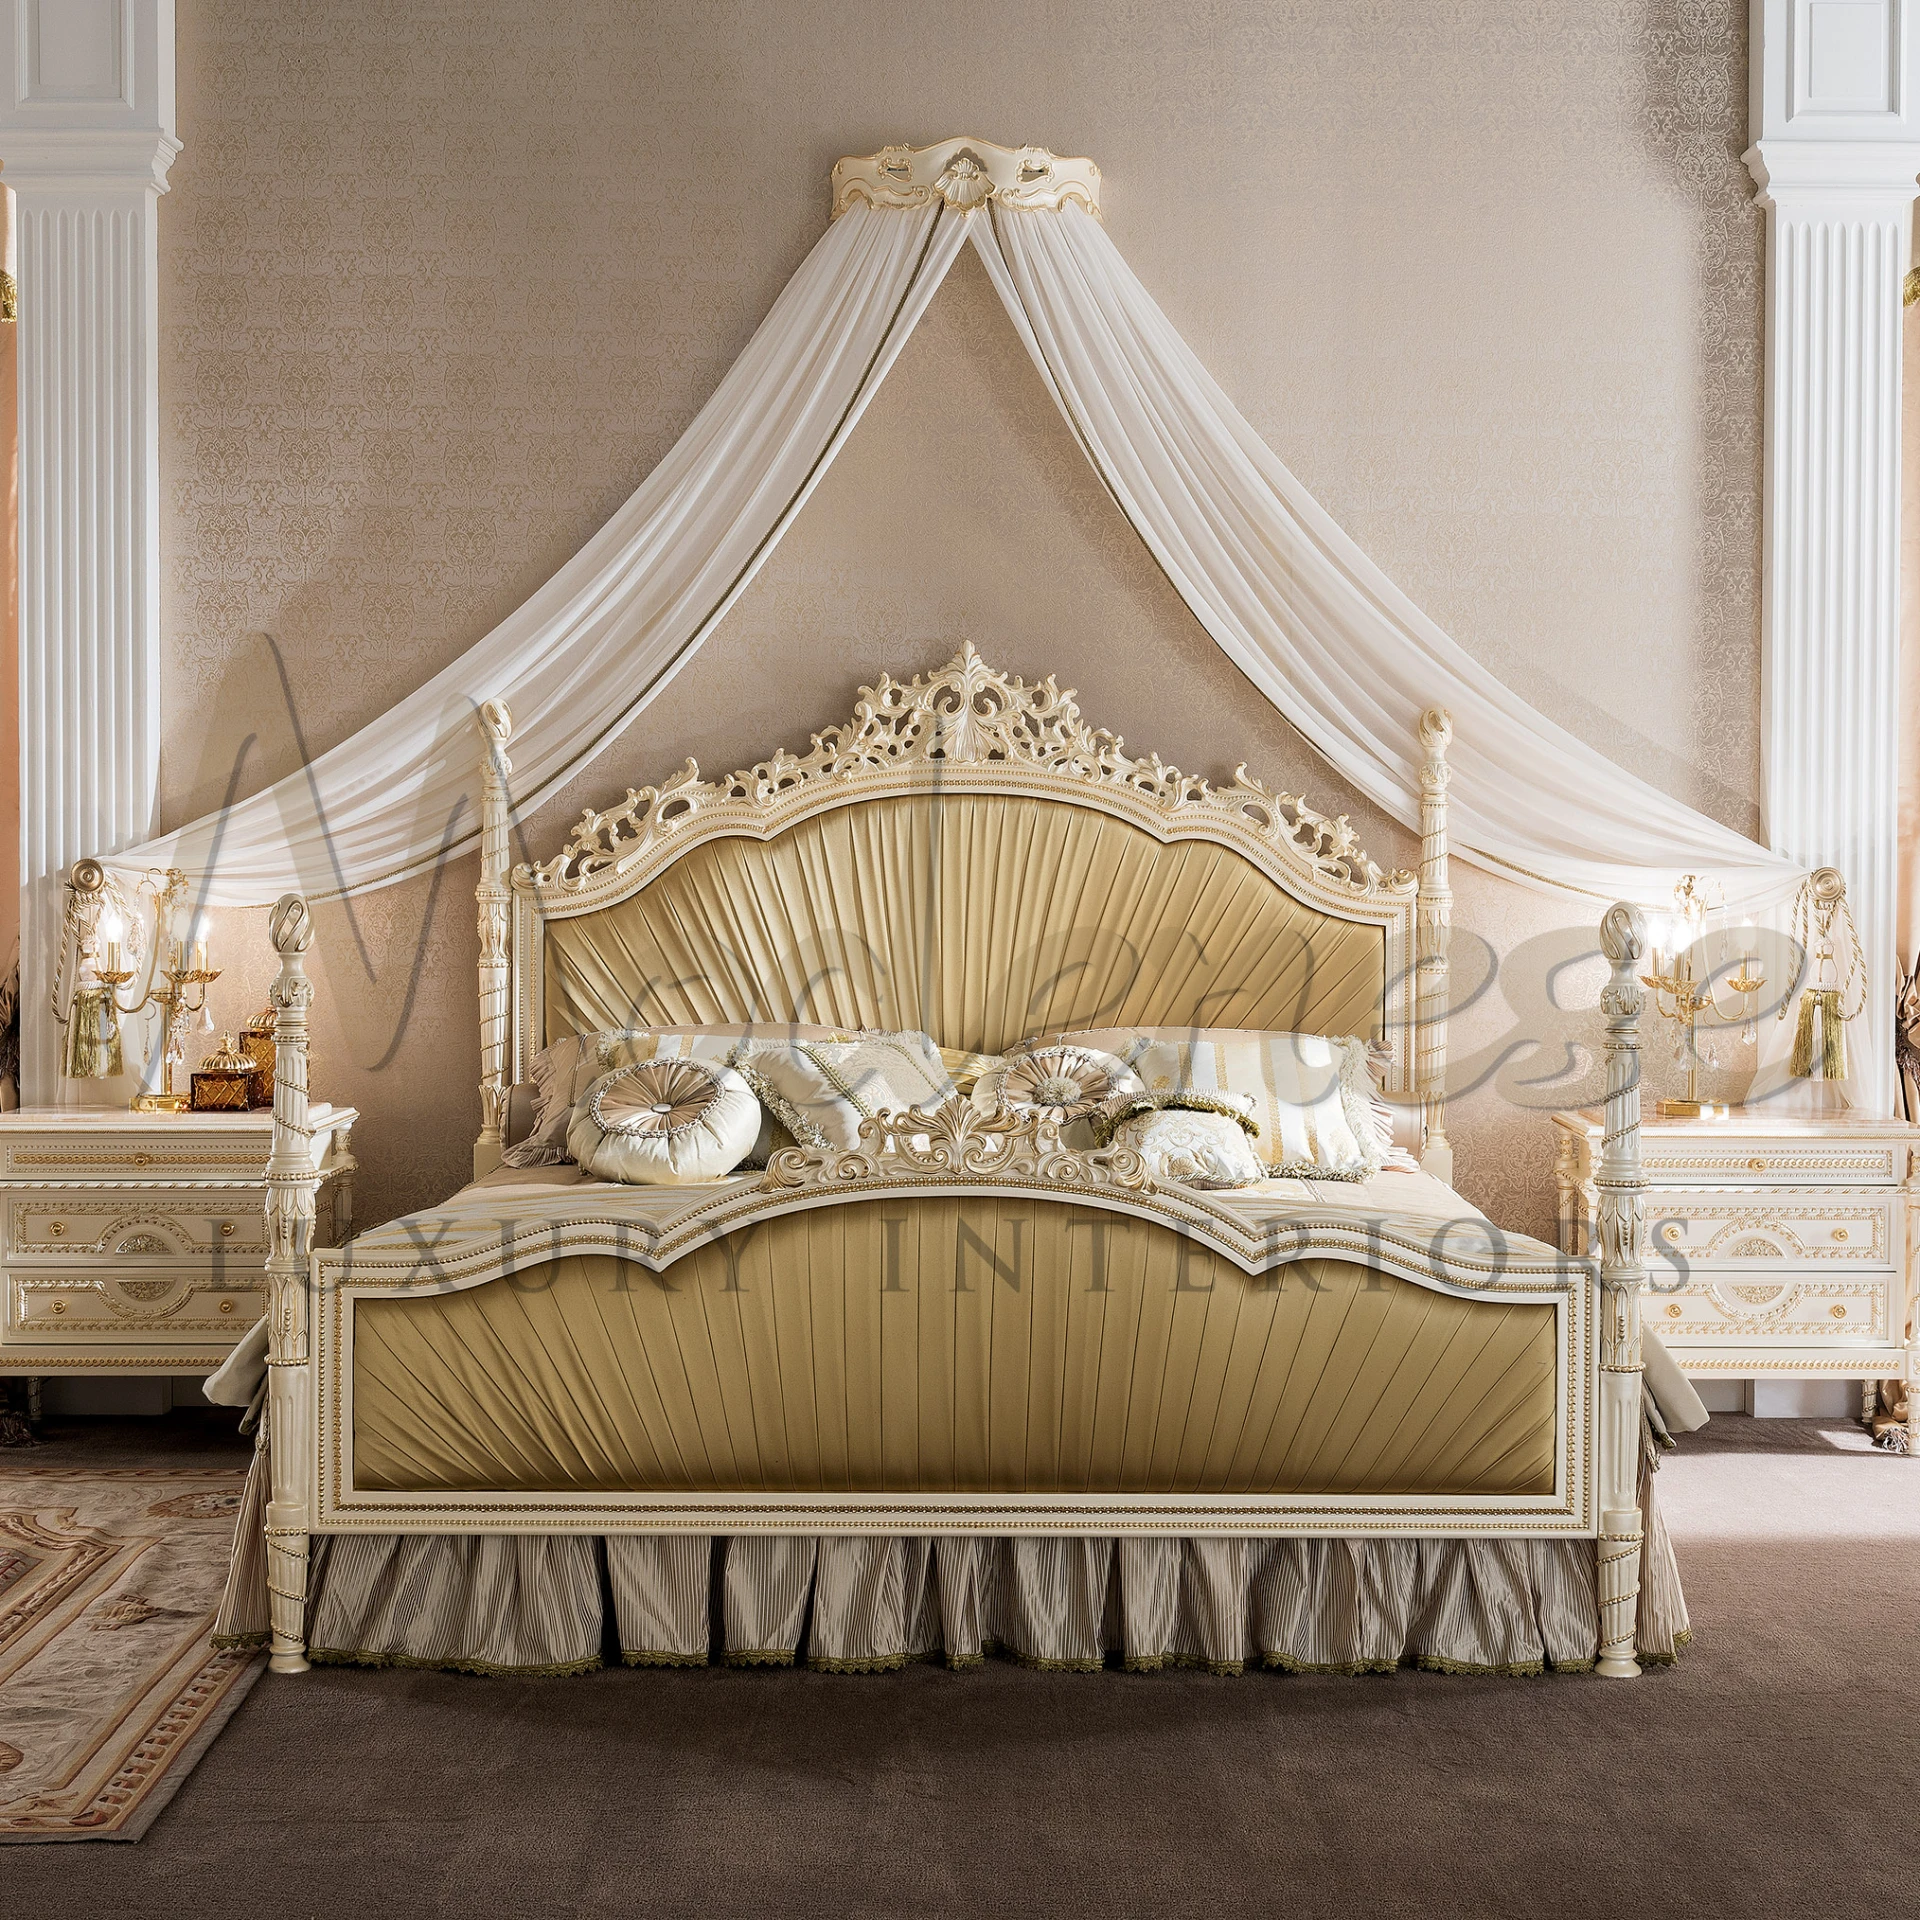 A sumptuous Modenese Furniture bed with elaborate gold detailing, flanked by matching nightstands, set beneath a flowing canopy in a luxurious bedroom.